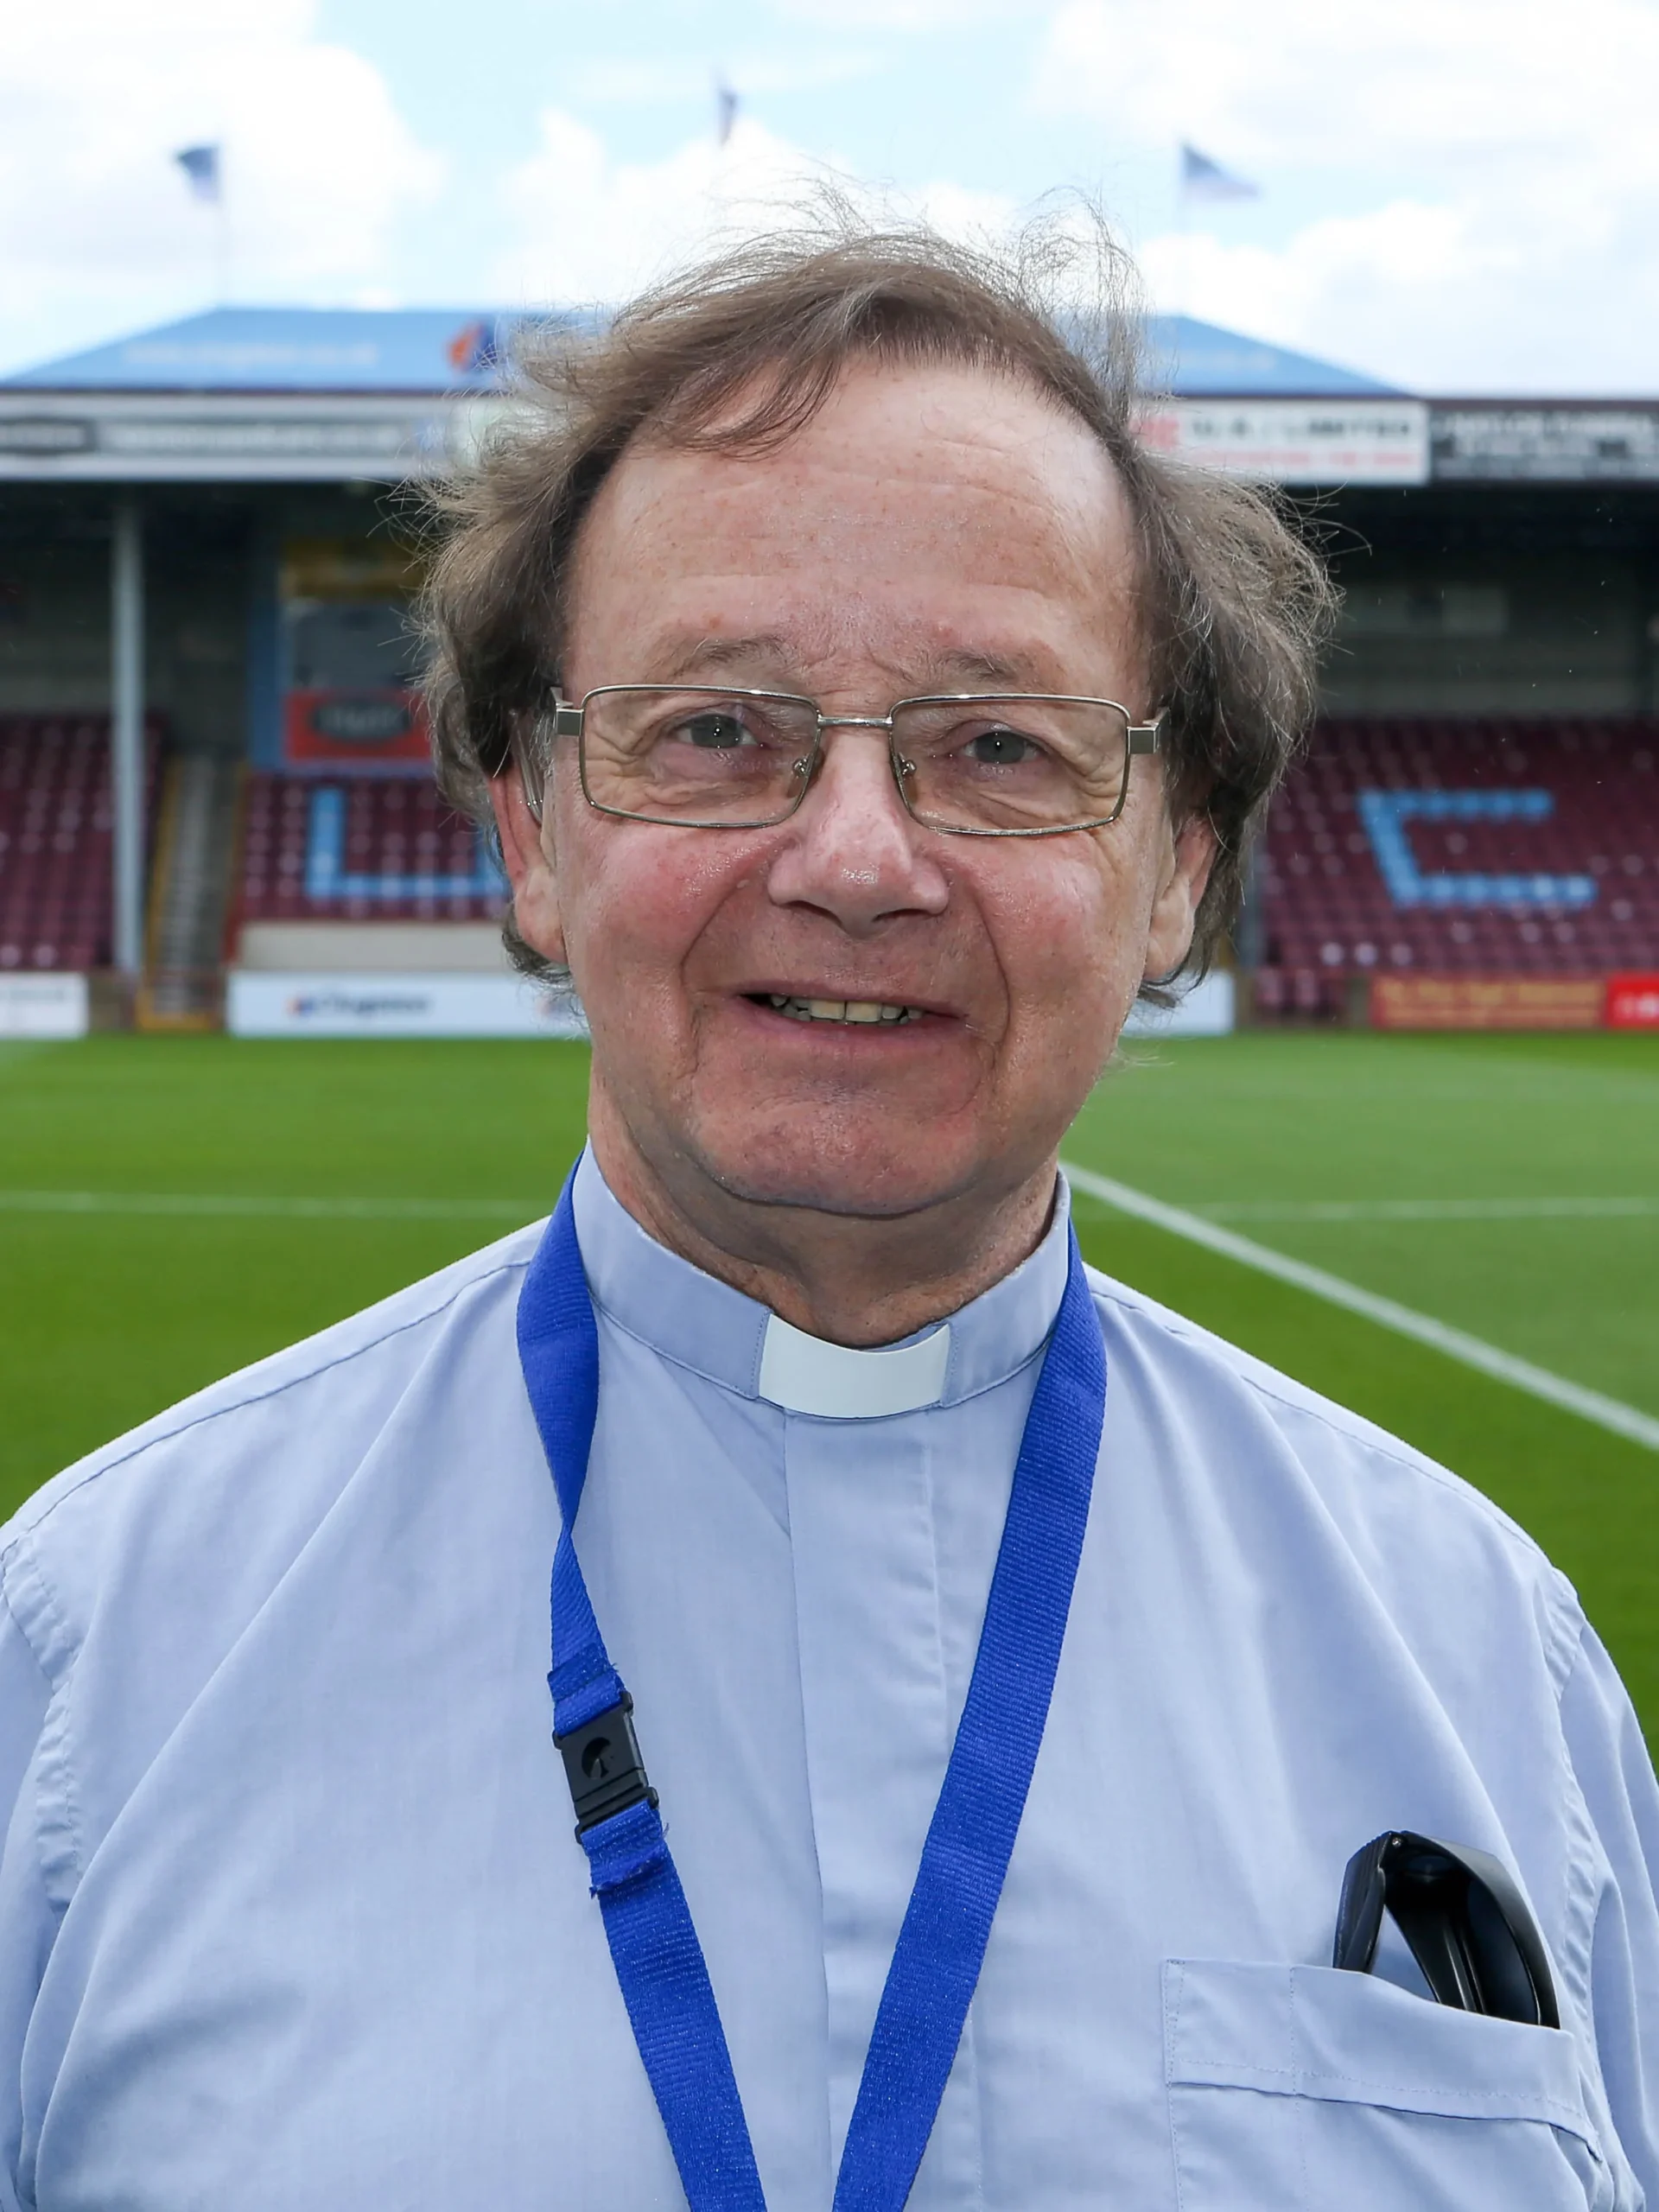 Rev Wright at Scunthorpe United’s grounds